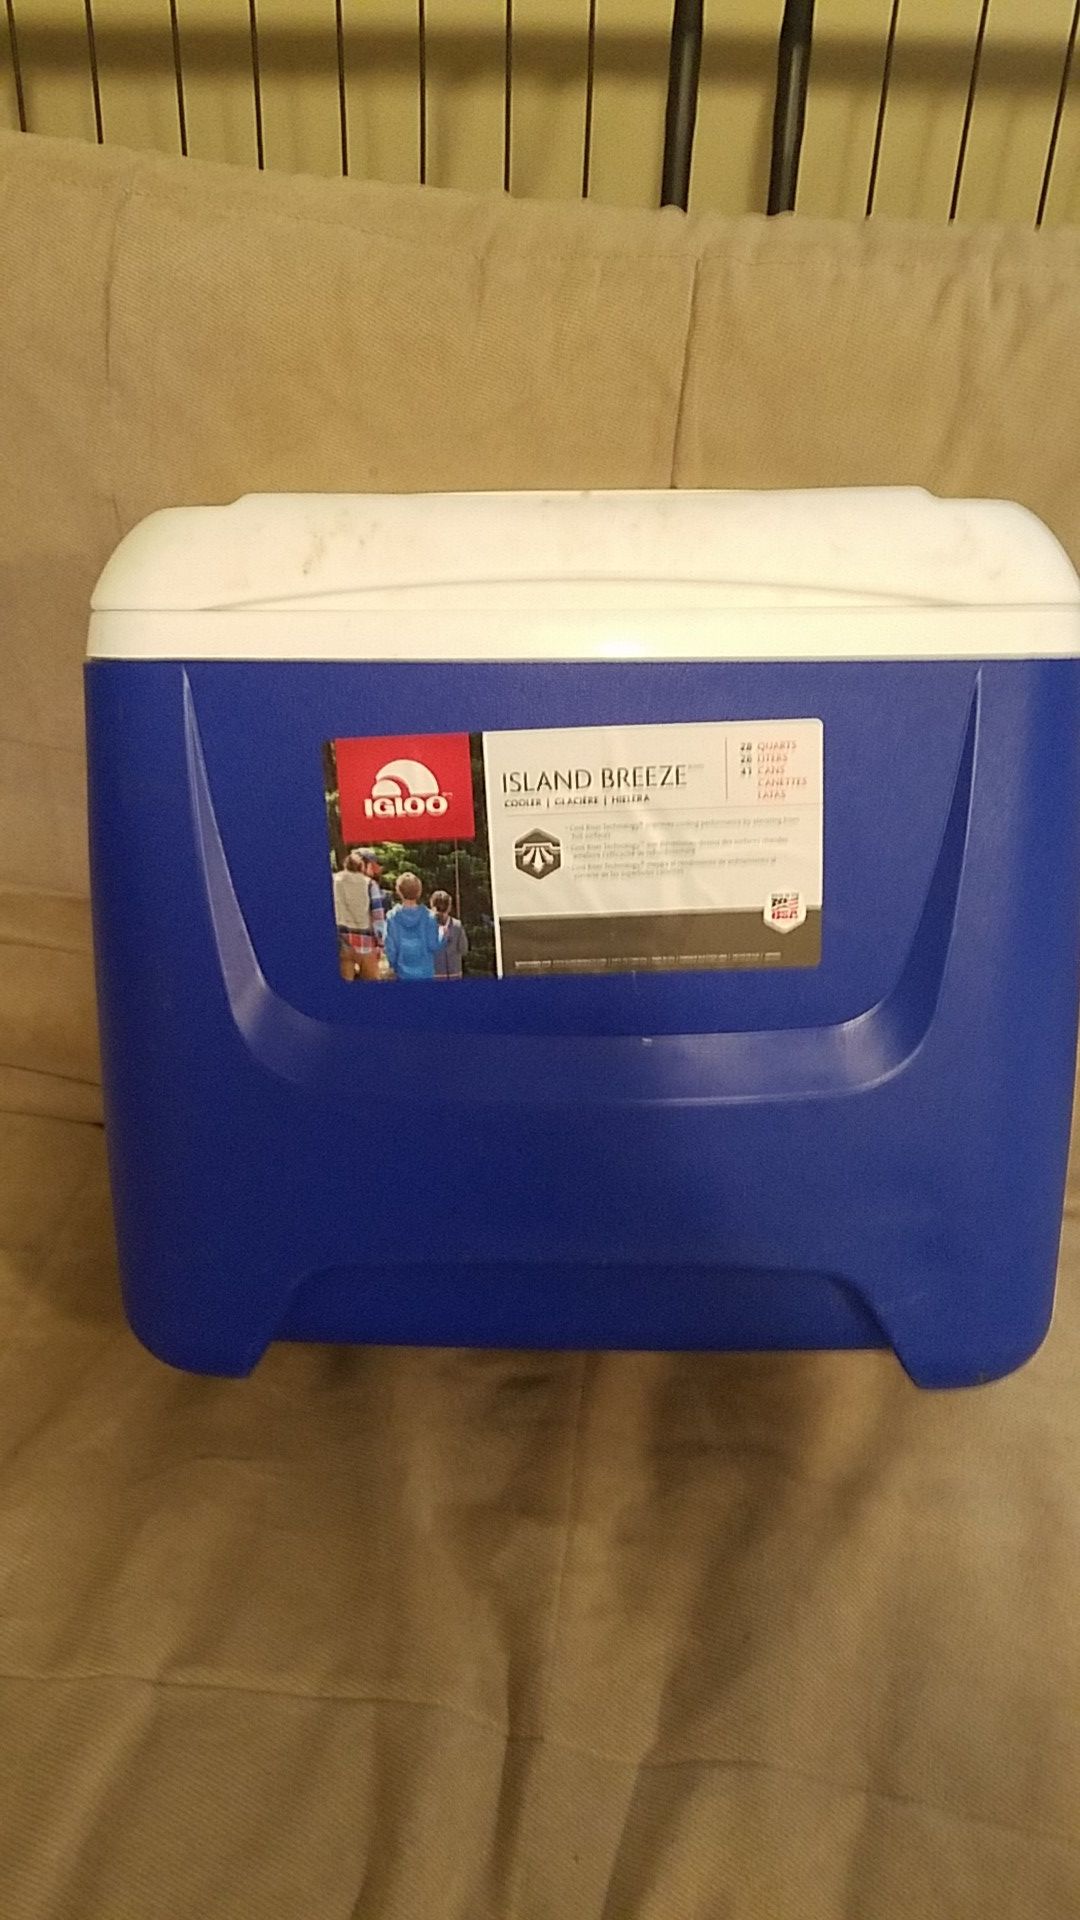 Igloo Cooler/Ice Chest